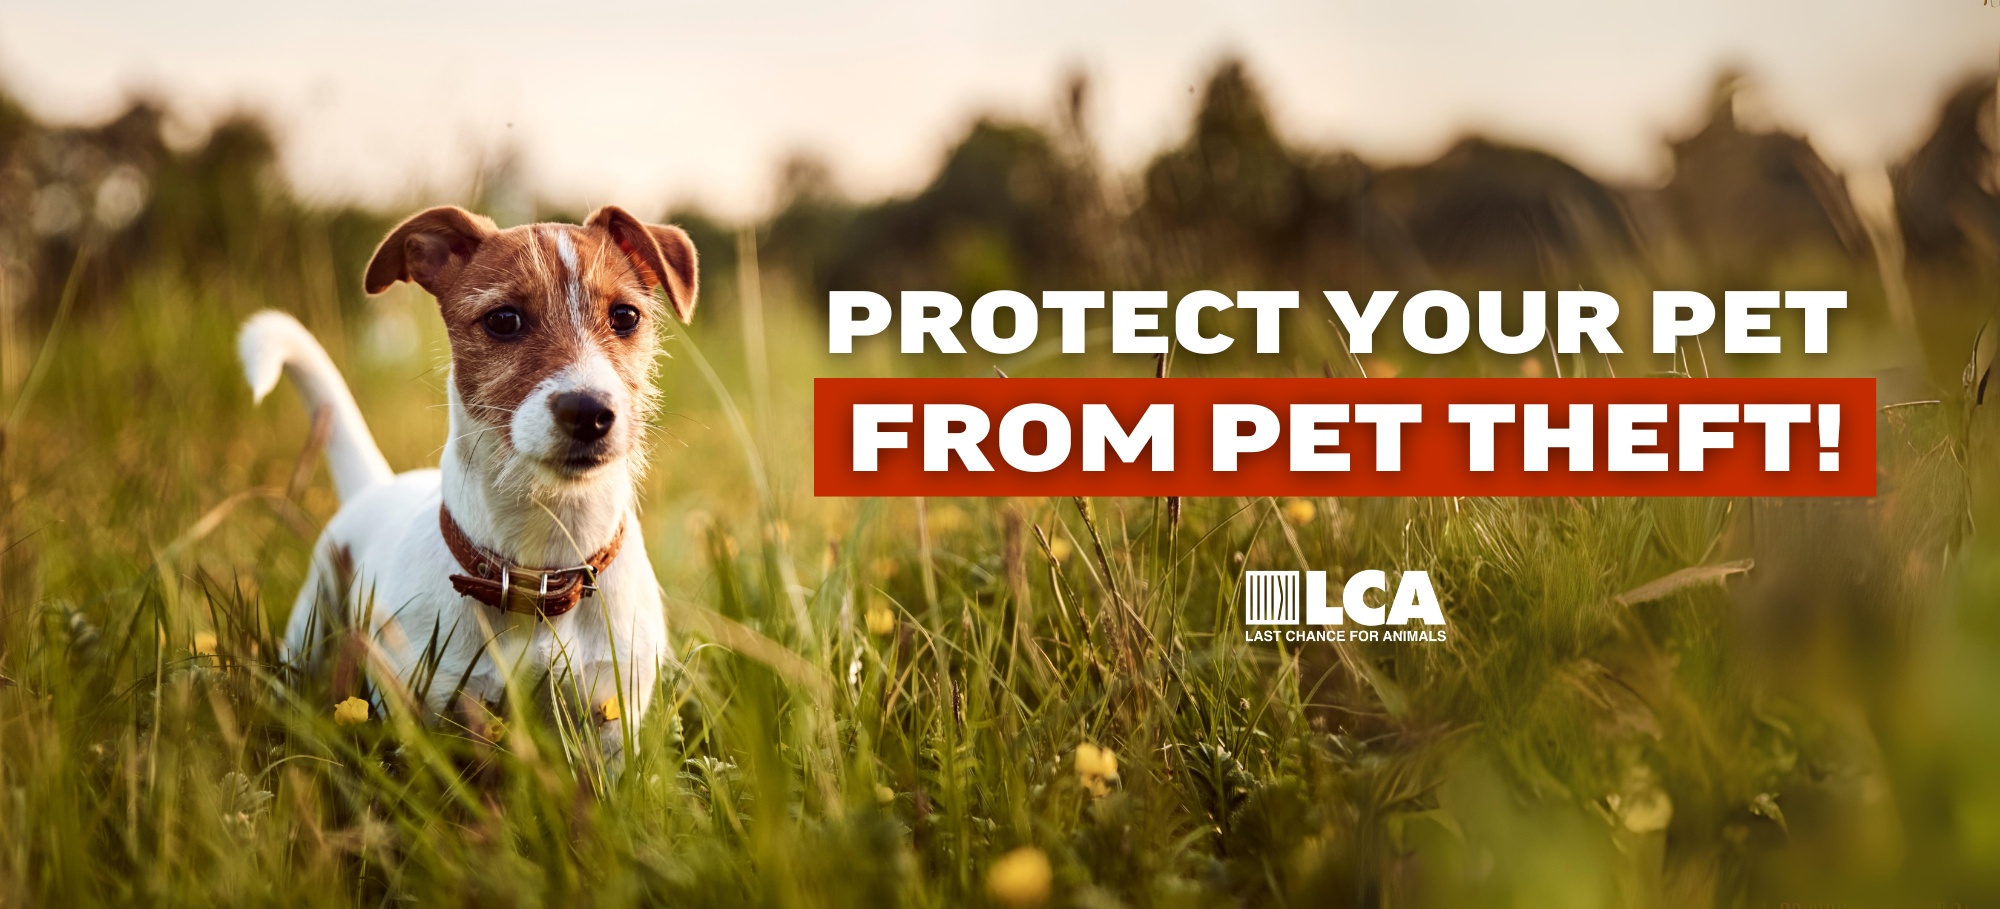 protect your pet from pet theft